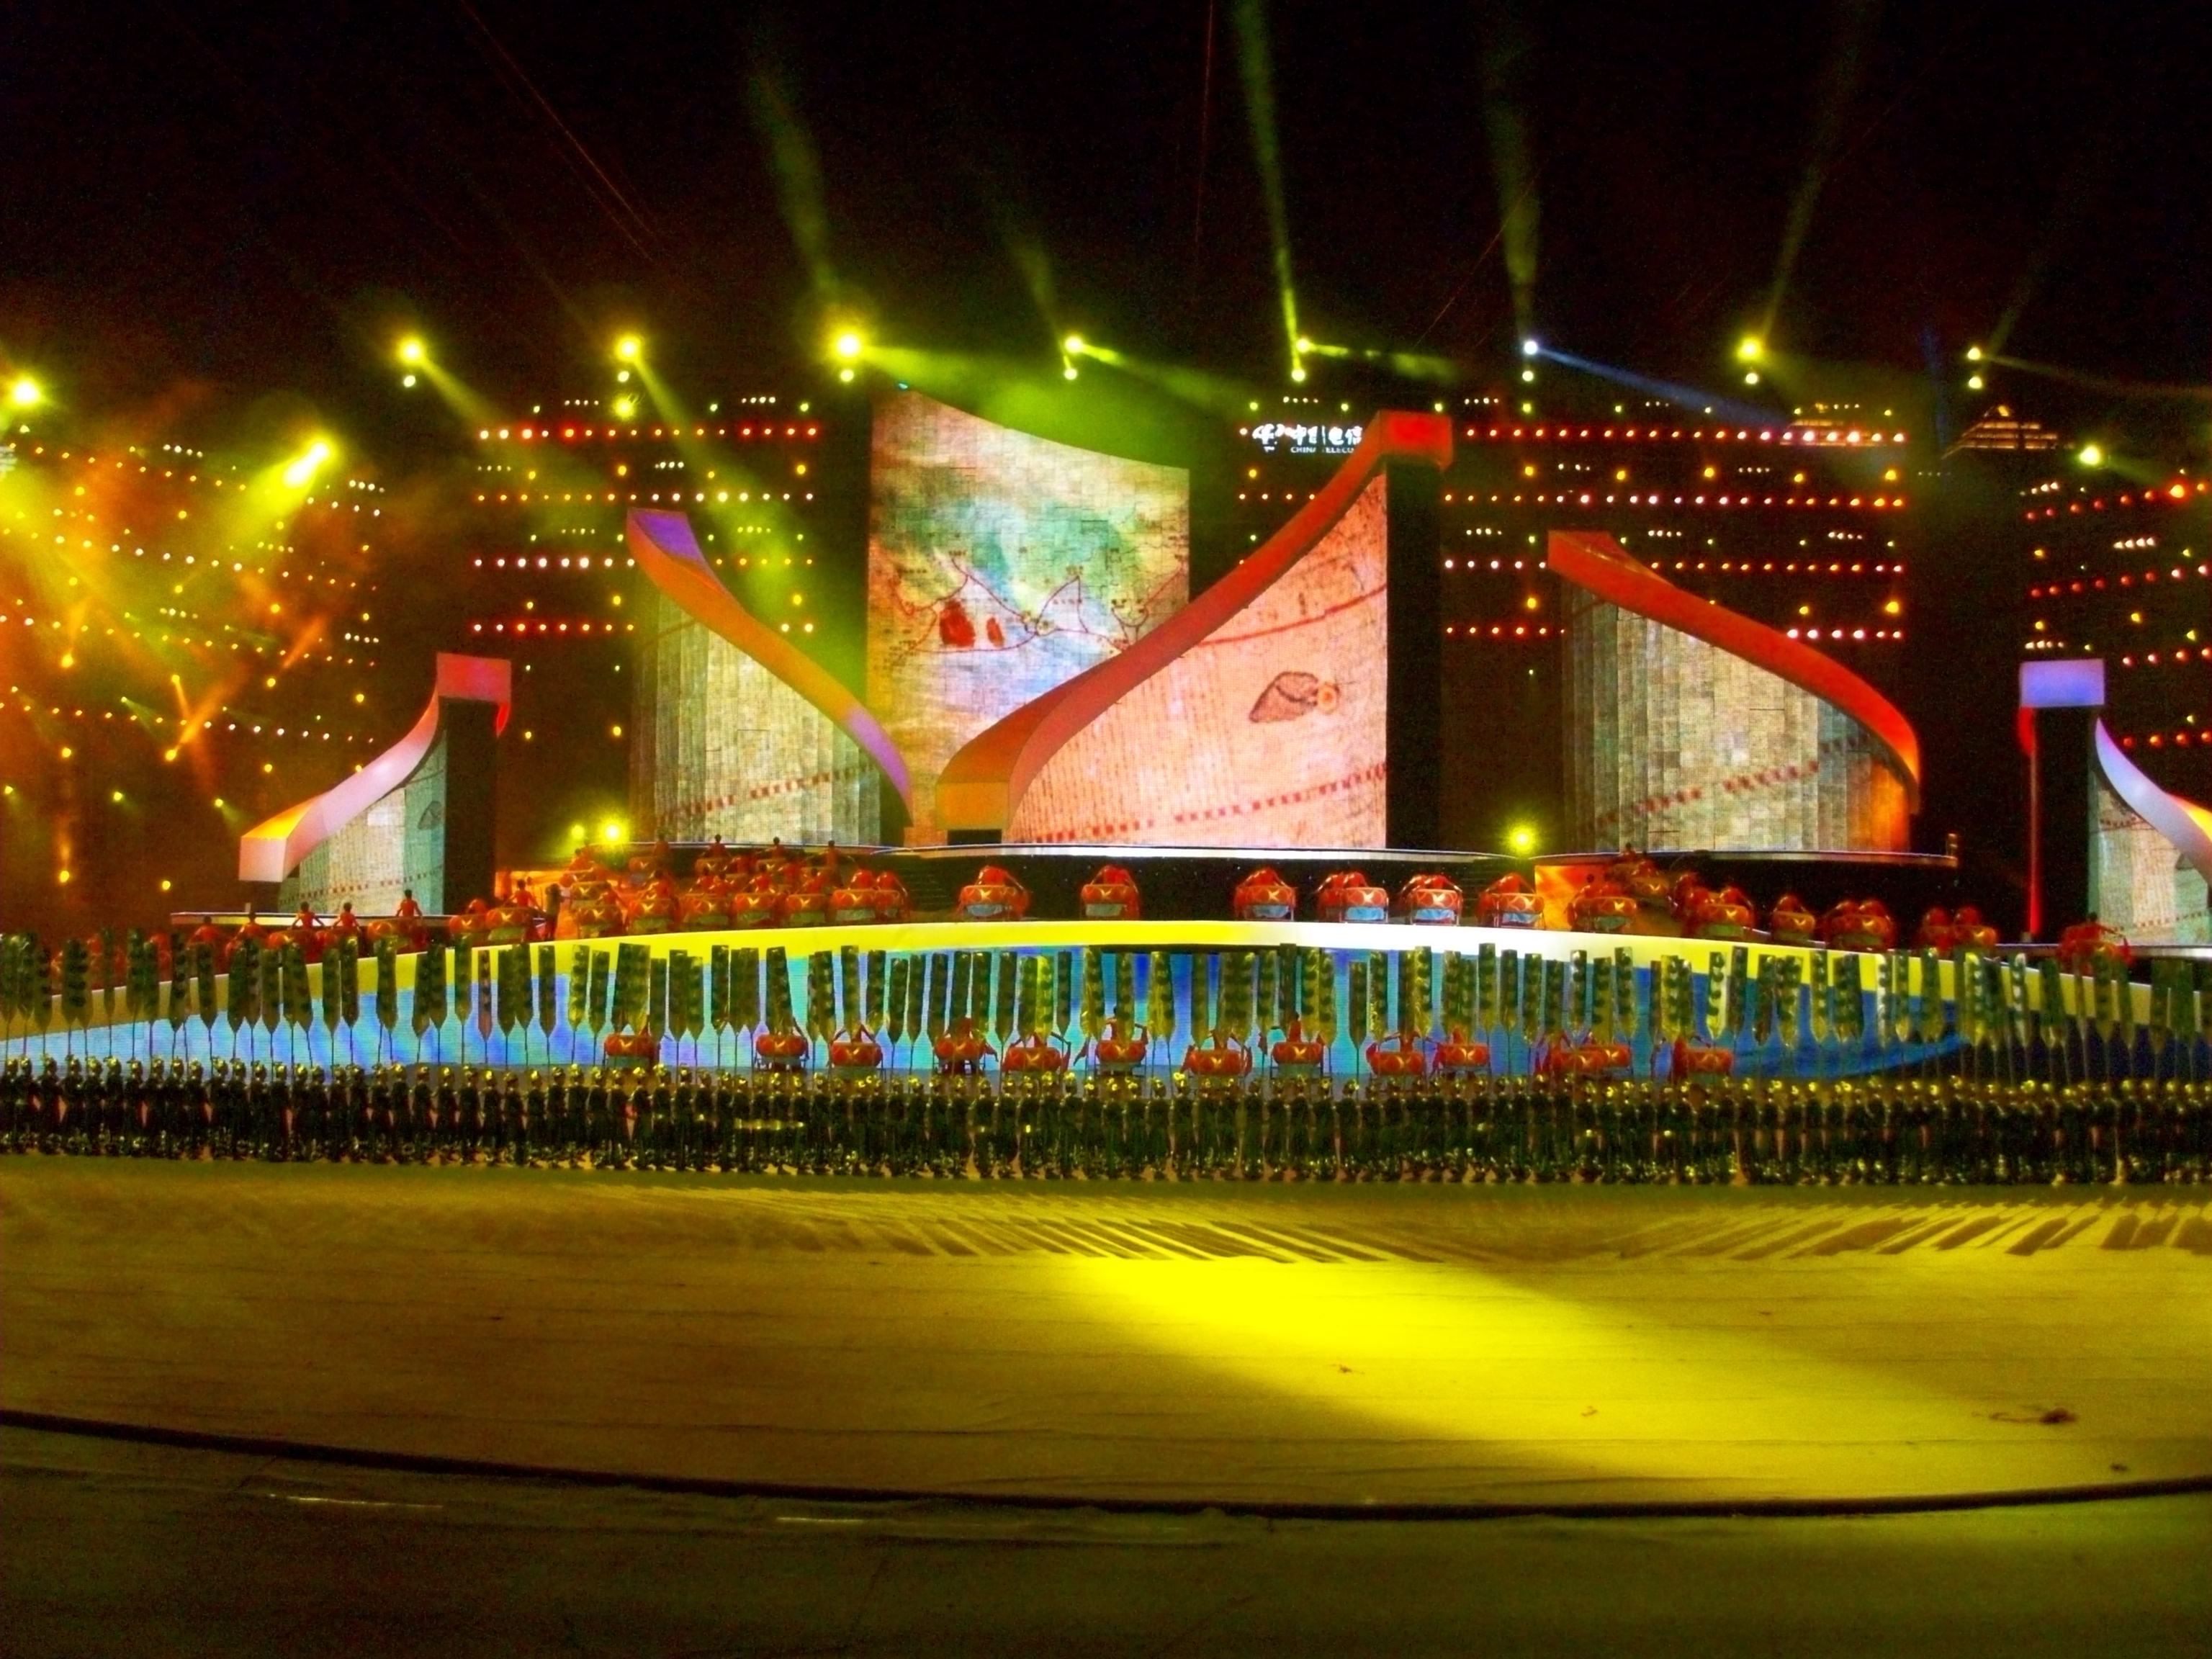 Large-scale stage performance